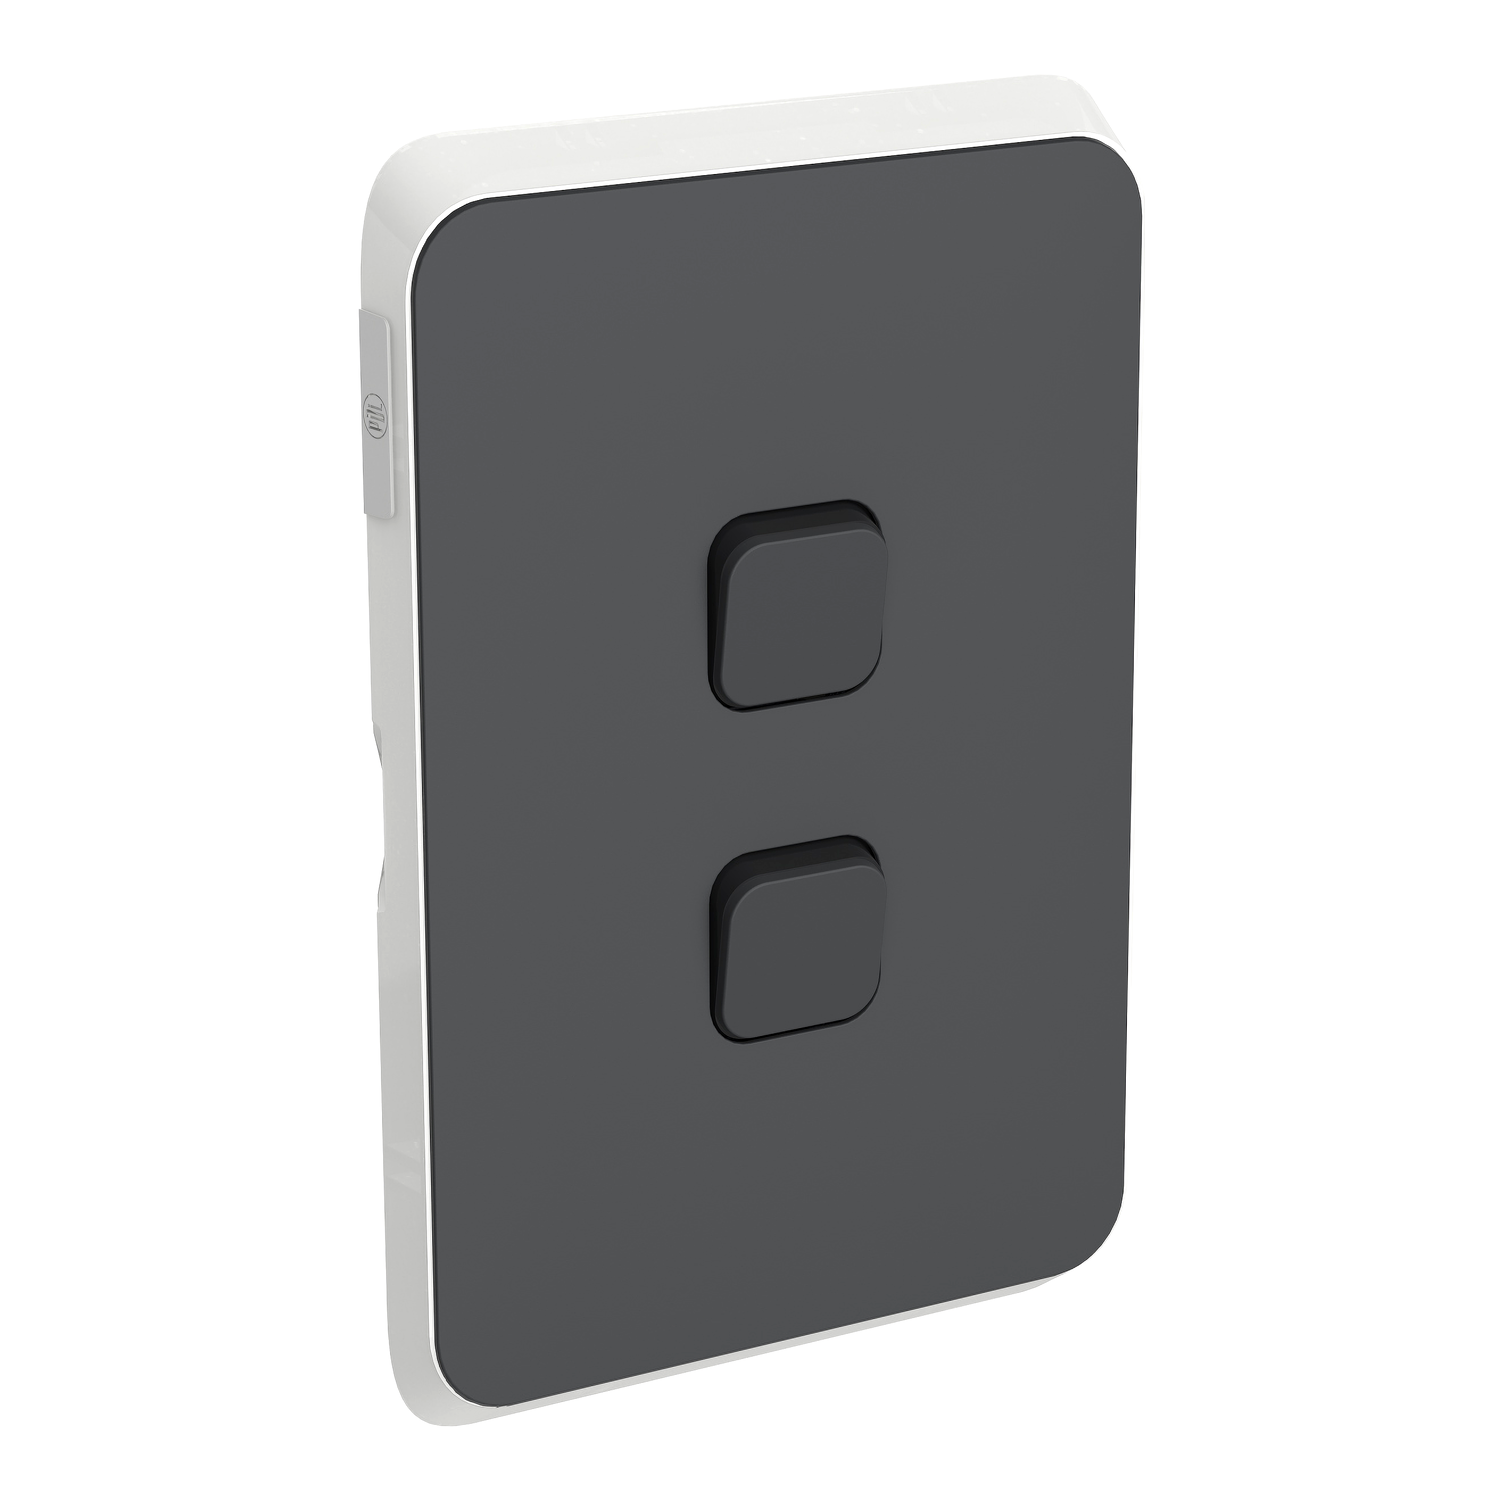 PDL Iconic - Cover Plate Switch 2-Gang - Anthracite